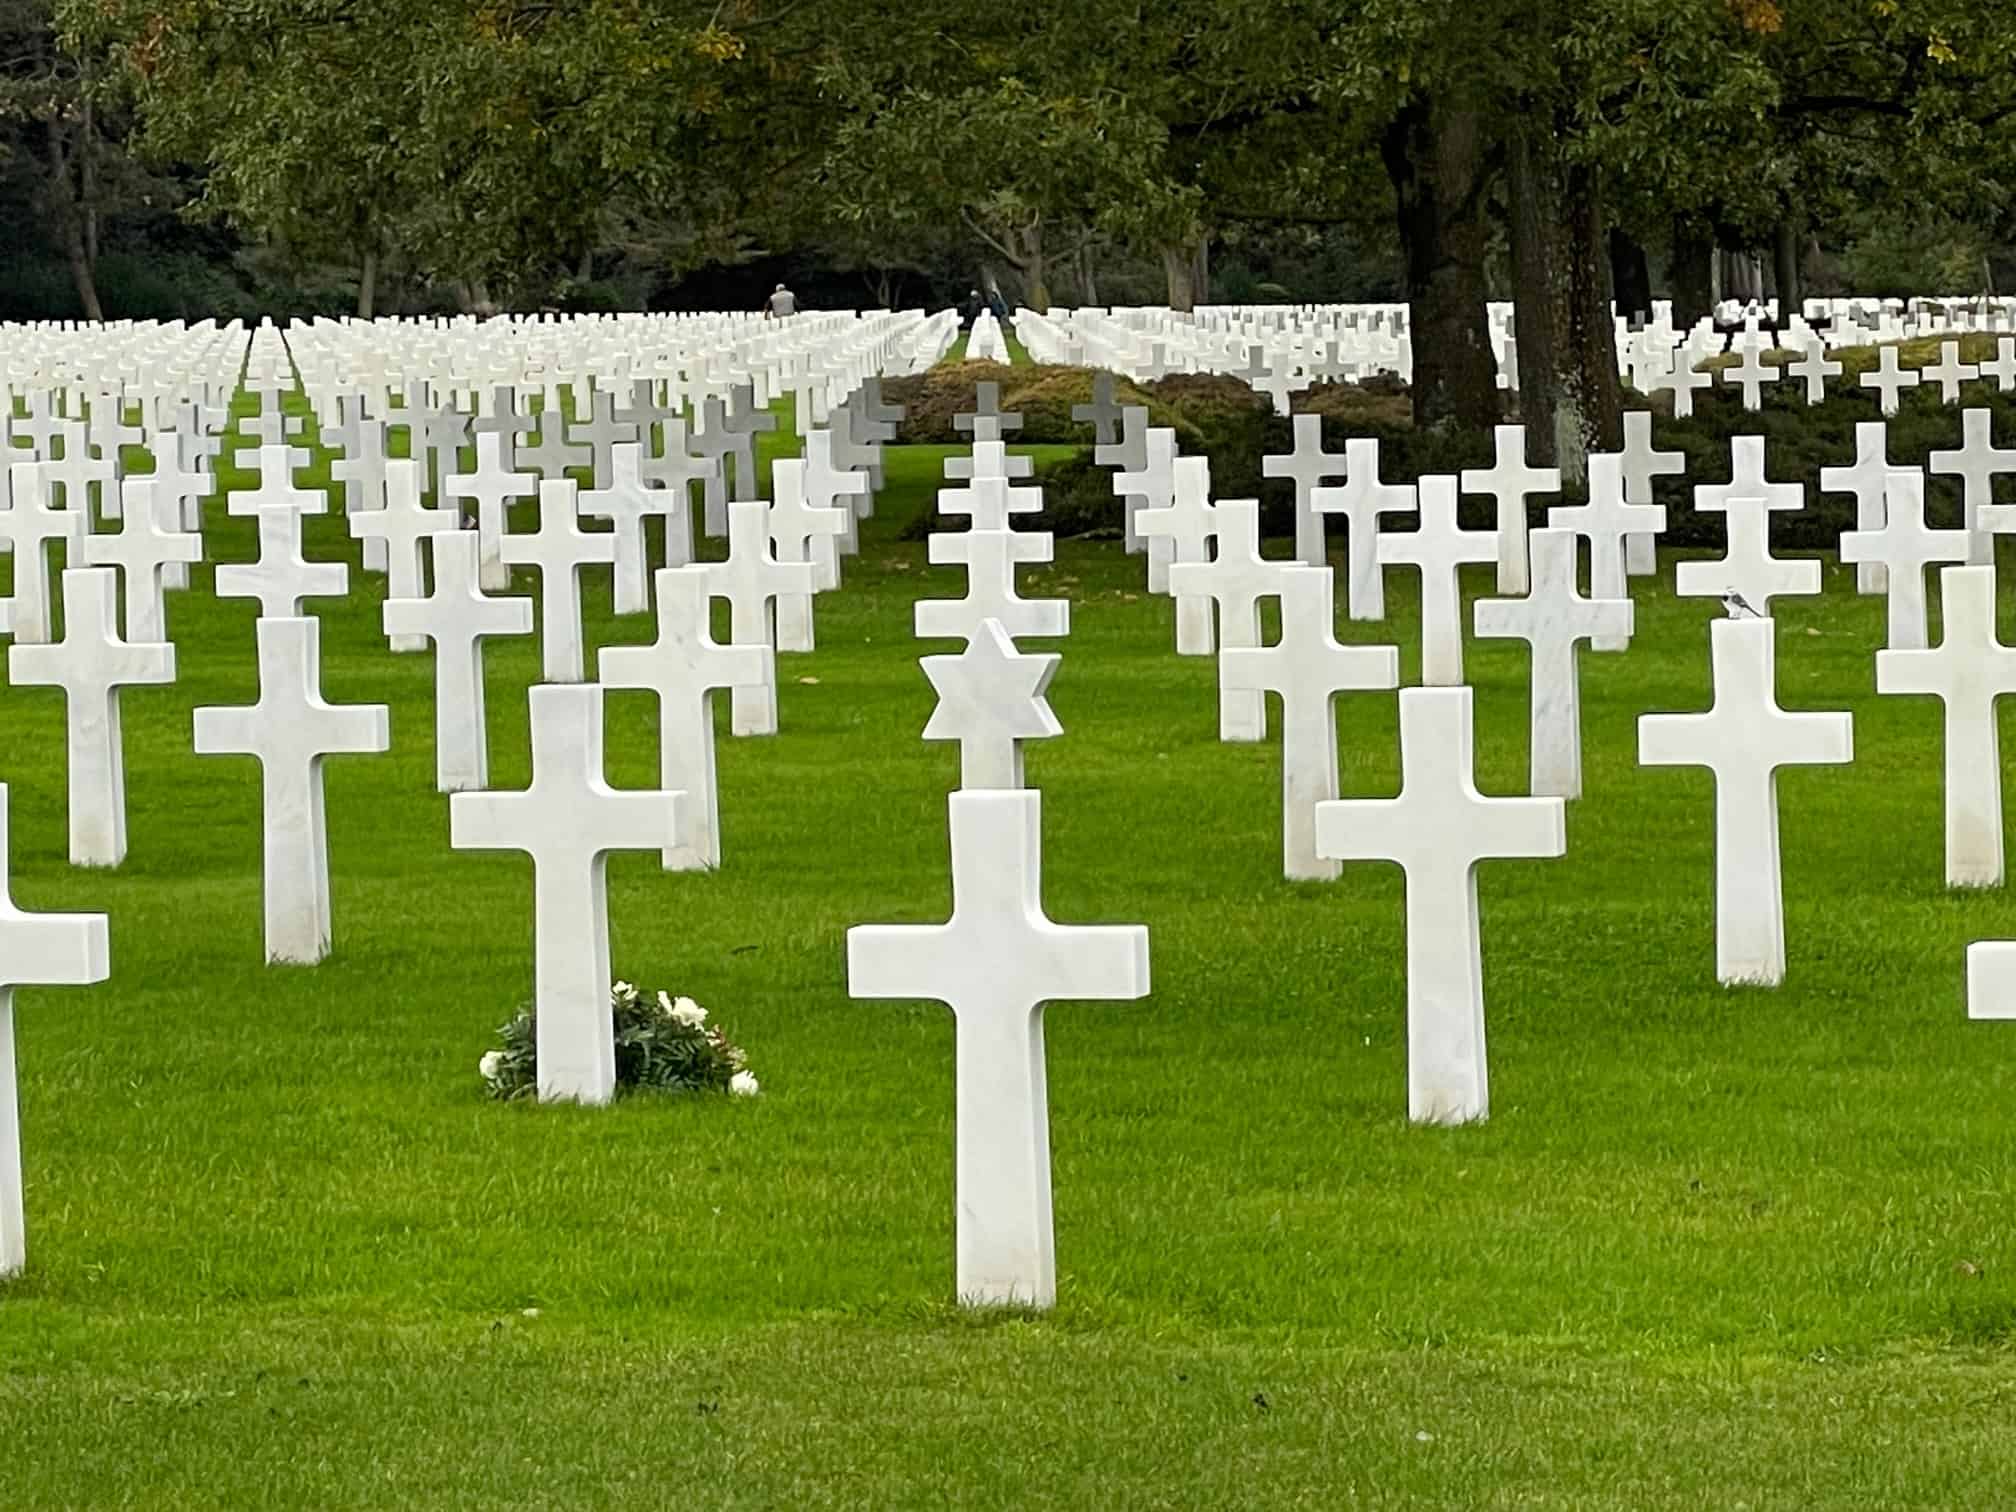 The American Cemetery in Normandy